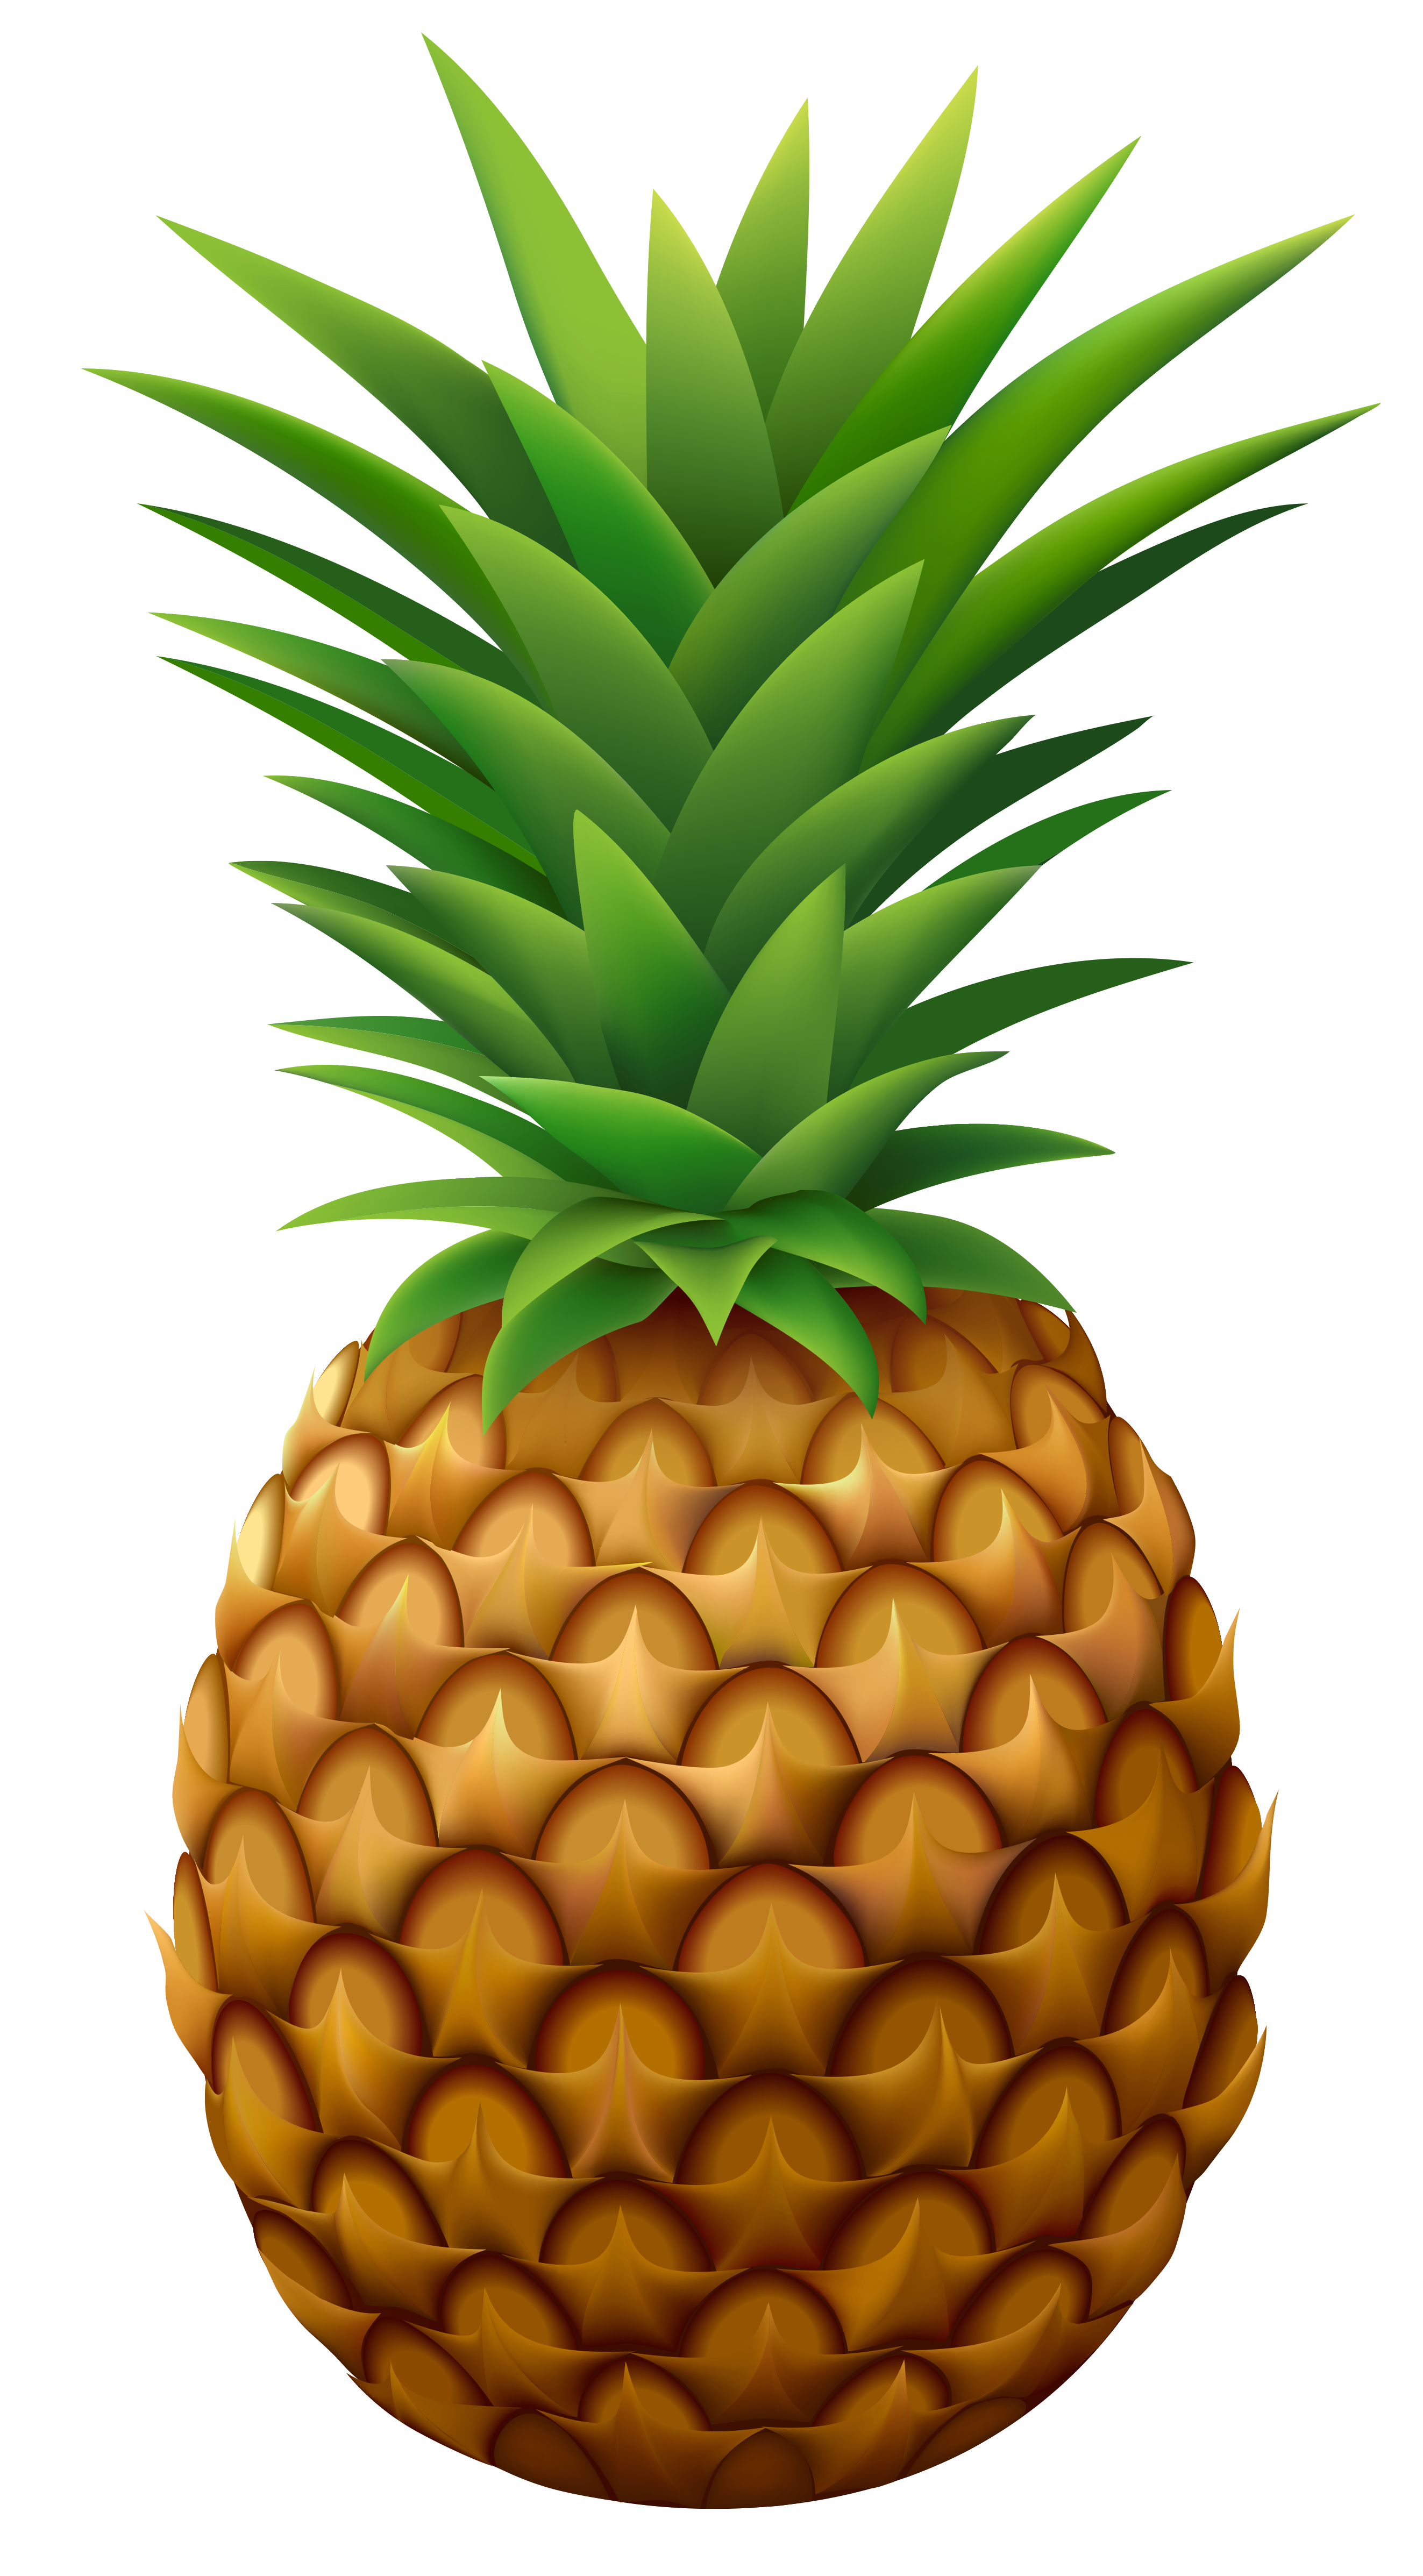 Pineapple png vector image. Watermelon clipart high re